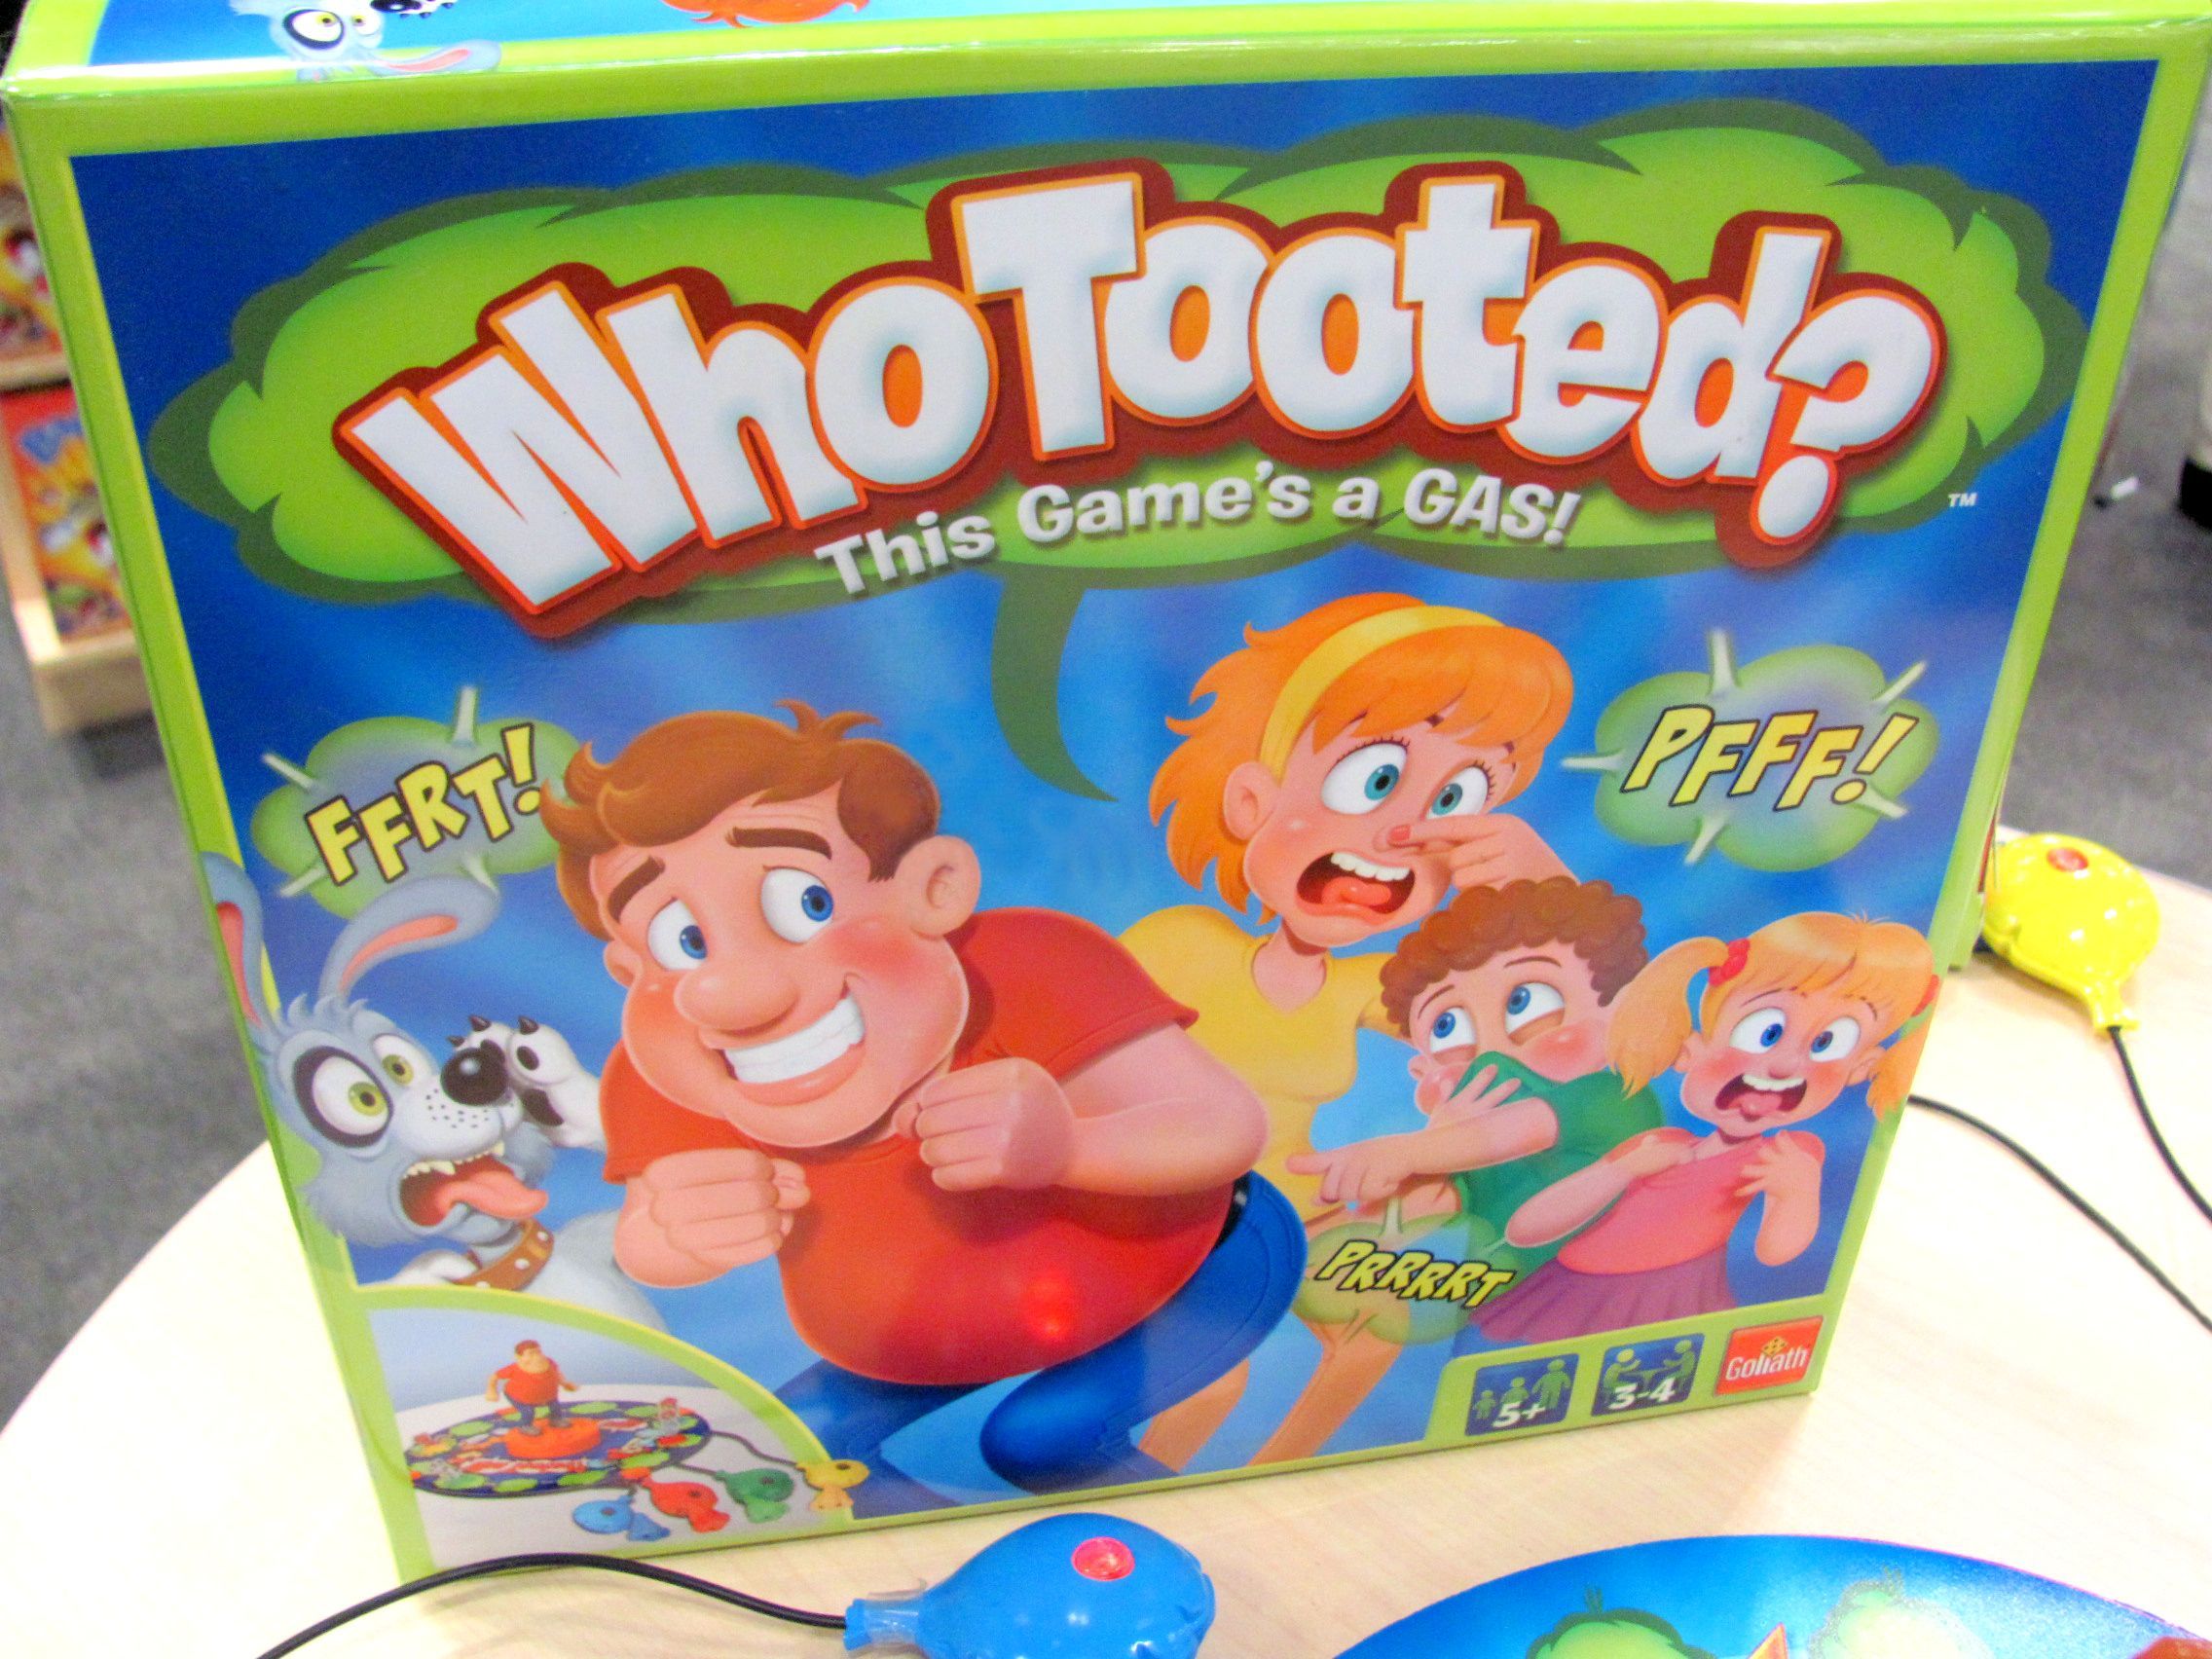 Who Tooted?